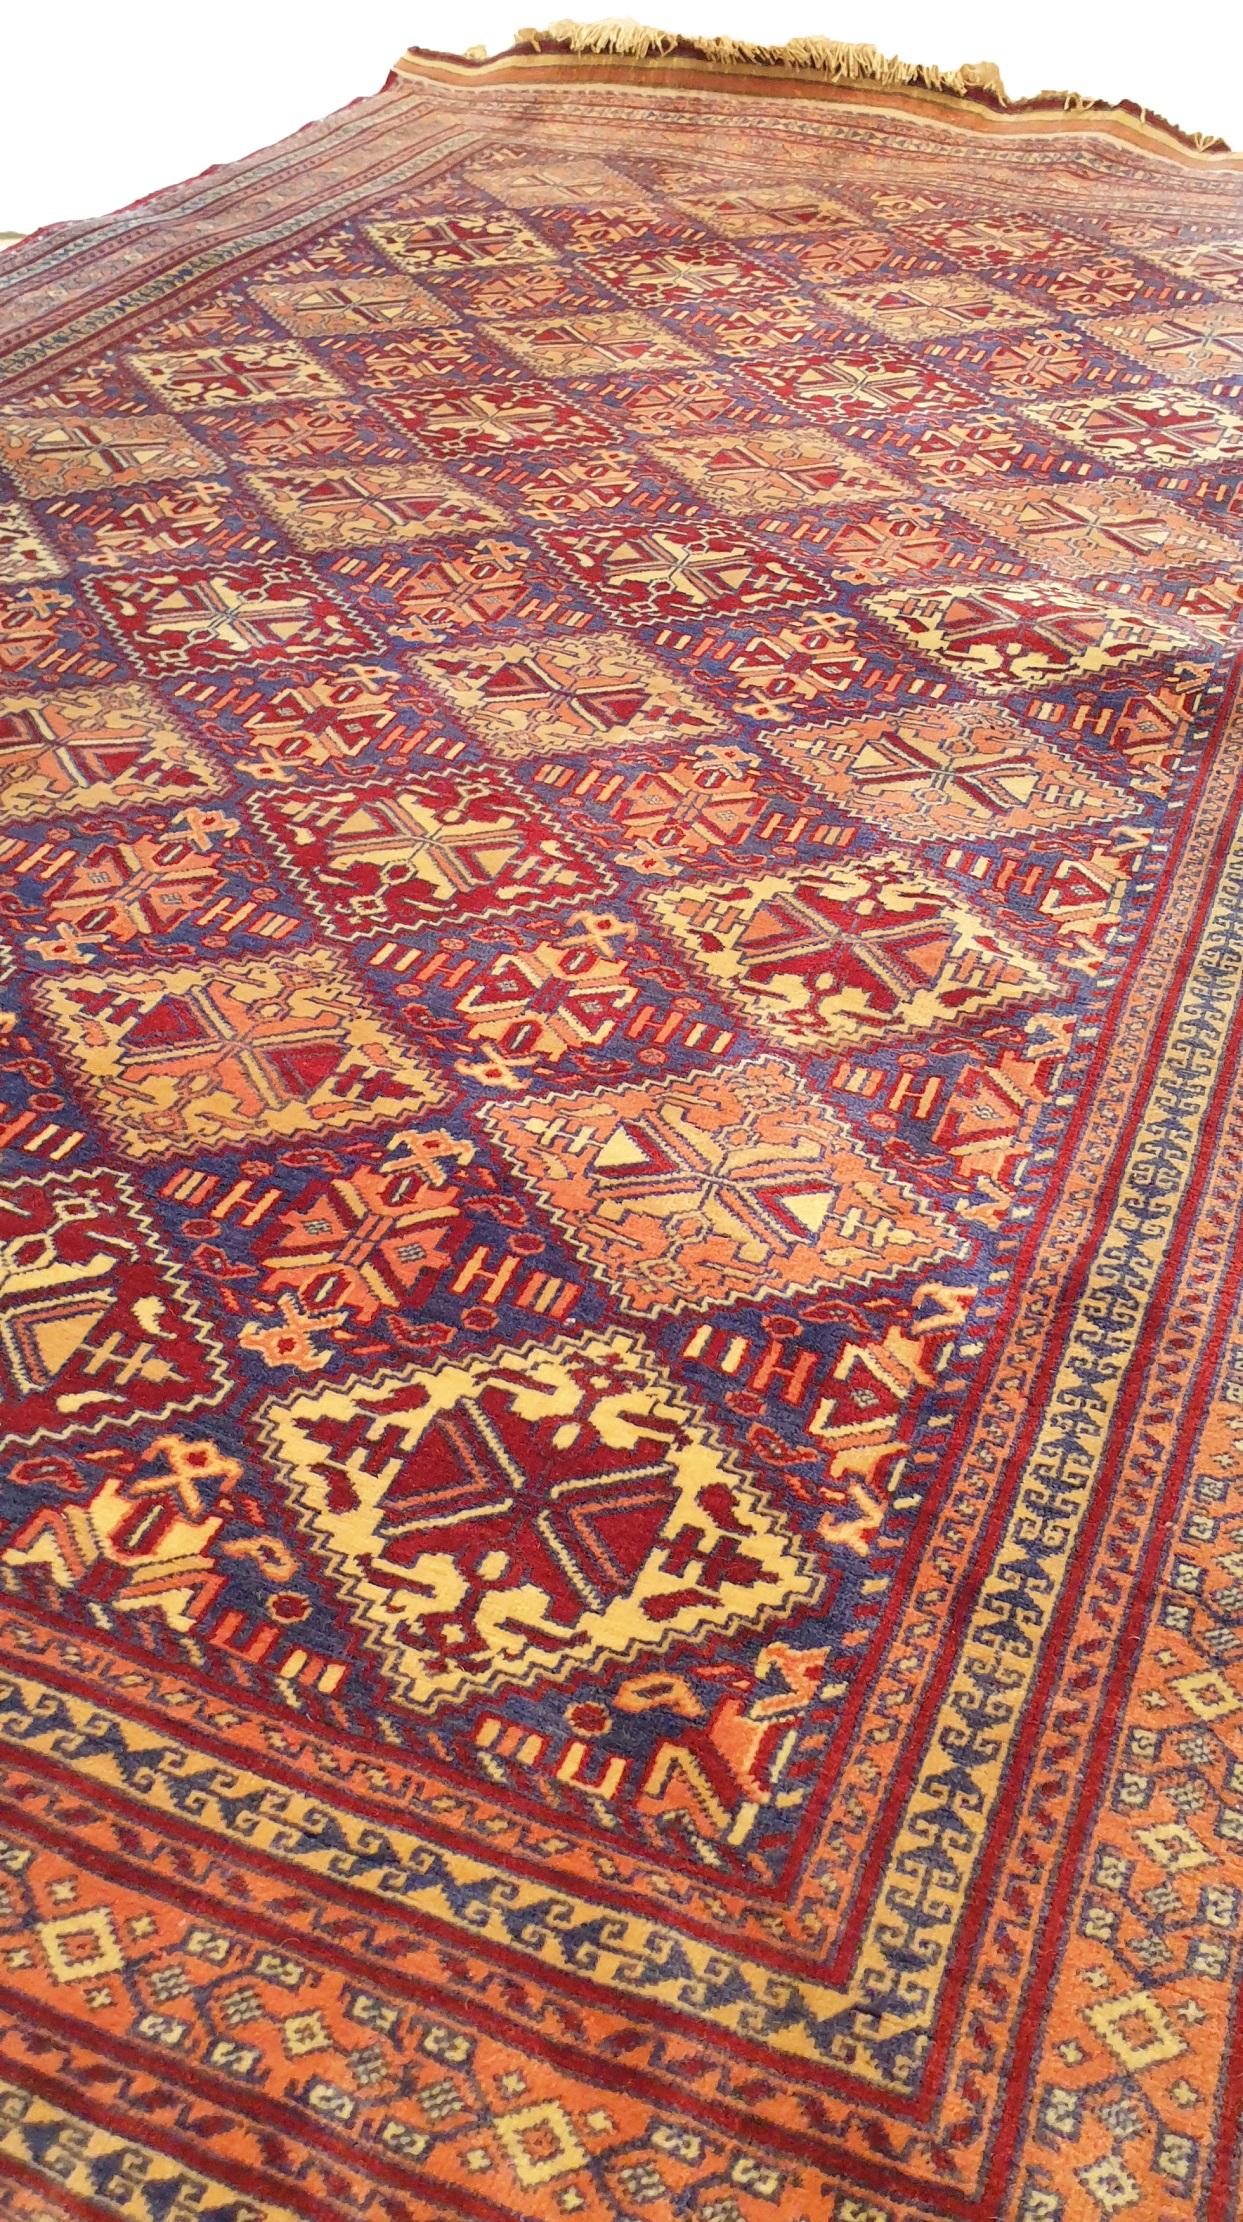 Tribal 739 - Beautiful Turkmen Bukhara Carpet from the 20th Century For Sale